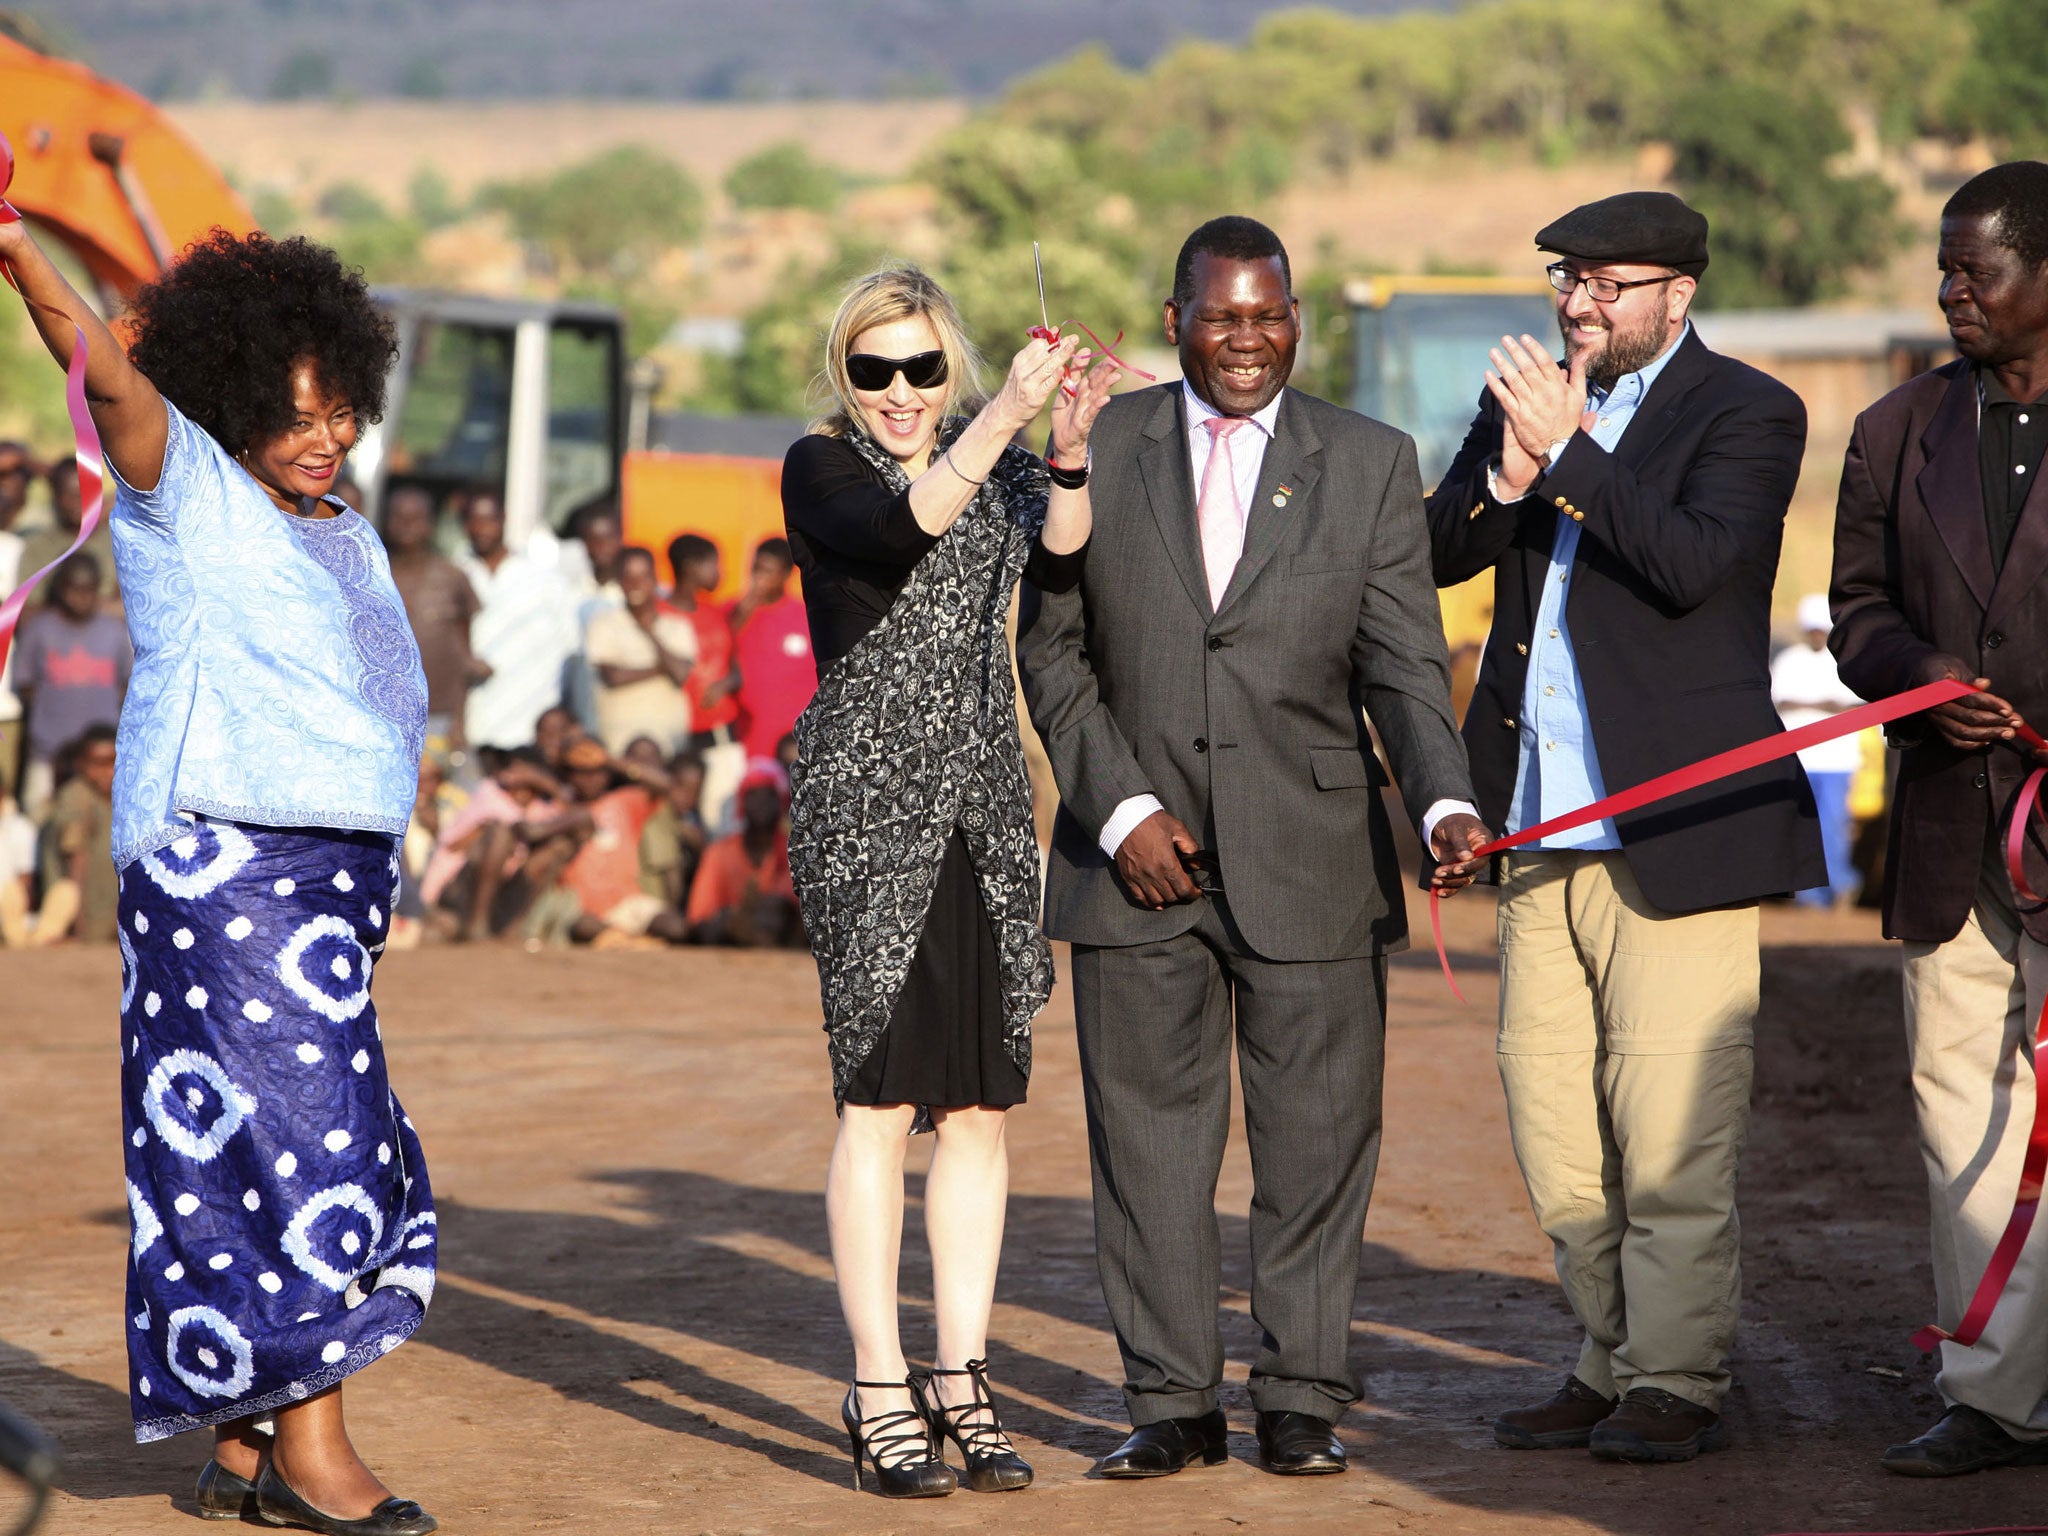 Pop star Madonna cuts the ribbon at the ground breaking ceremony for the Raising Malawi Academy for Girls in Malawi in 2009